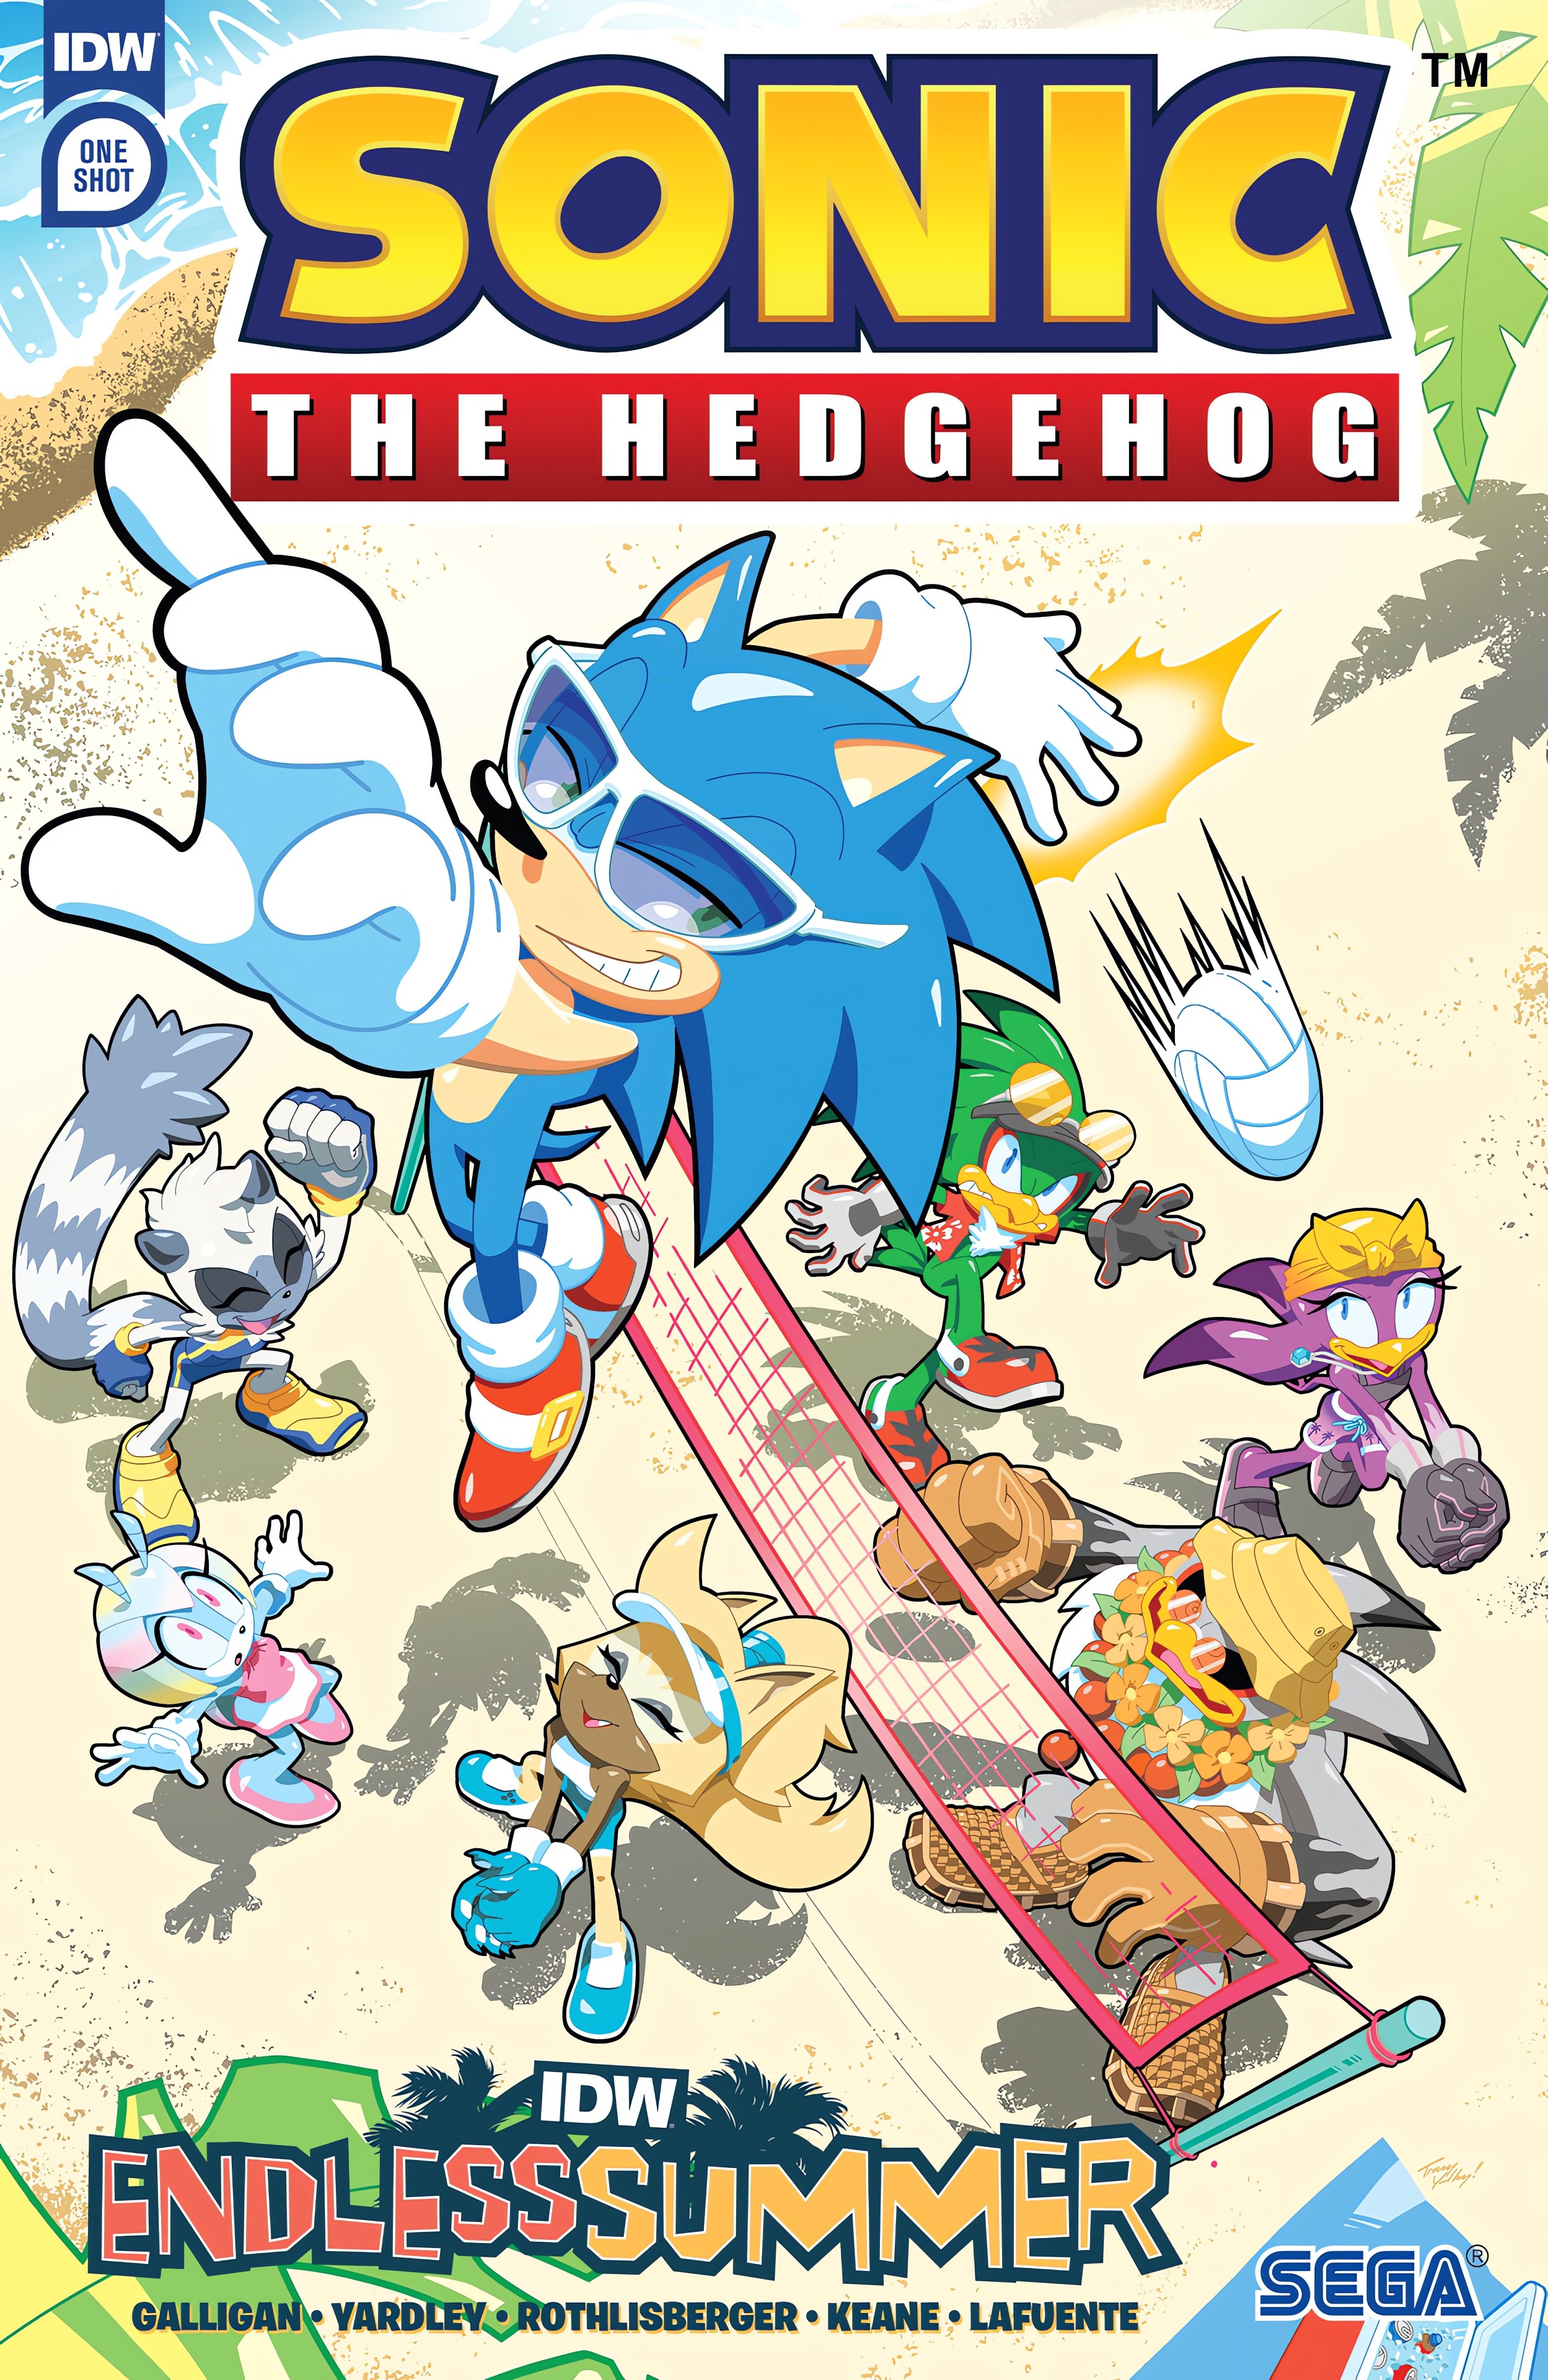 Read online IDW Endless Summer Sonic the Hedgehog comic -  Issue # Full - 1